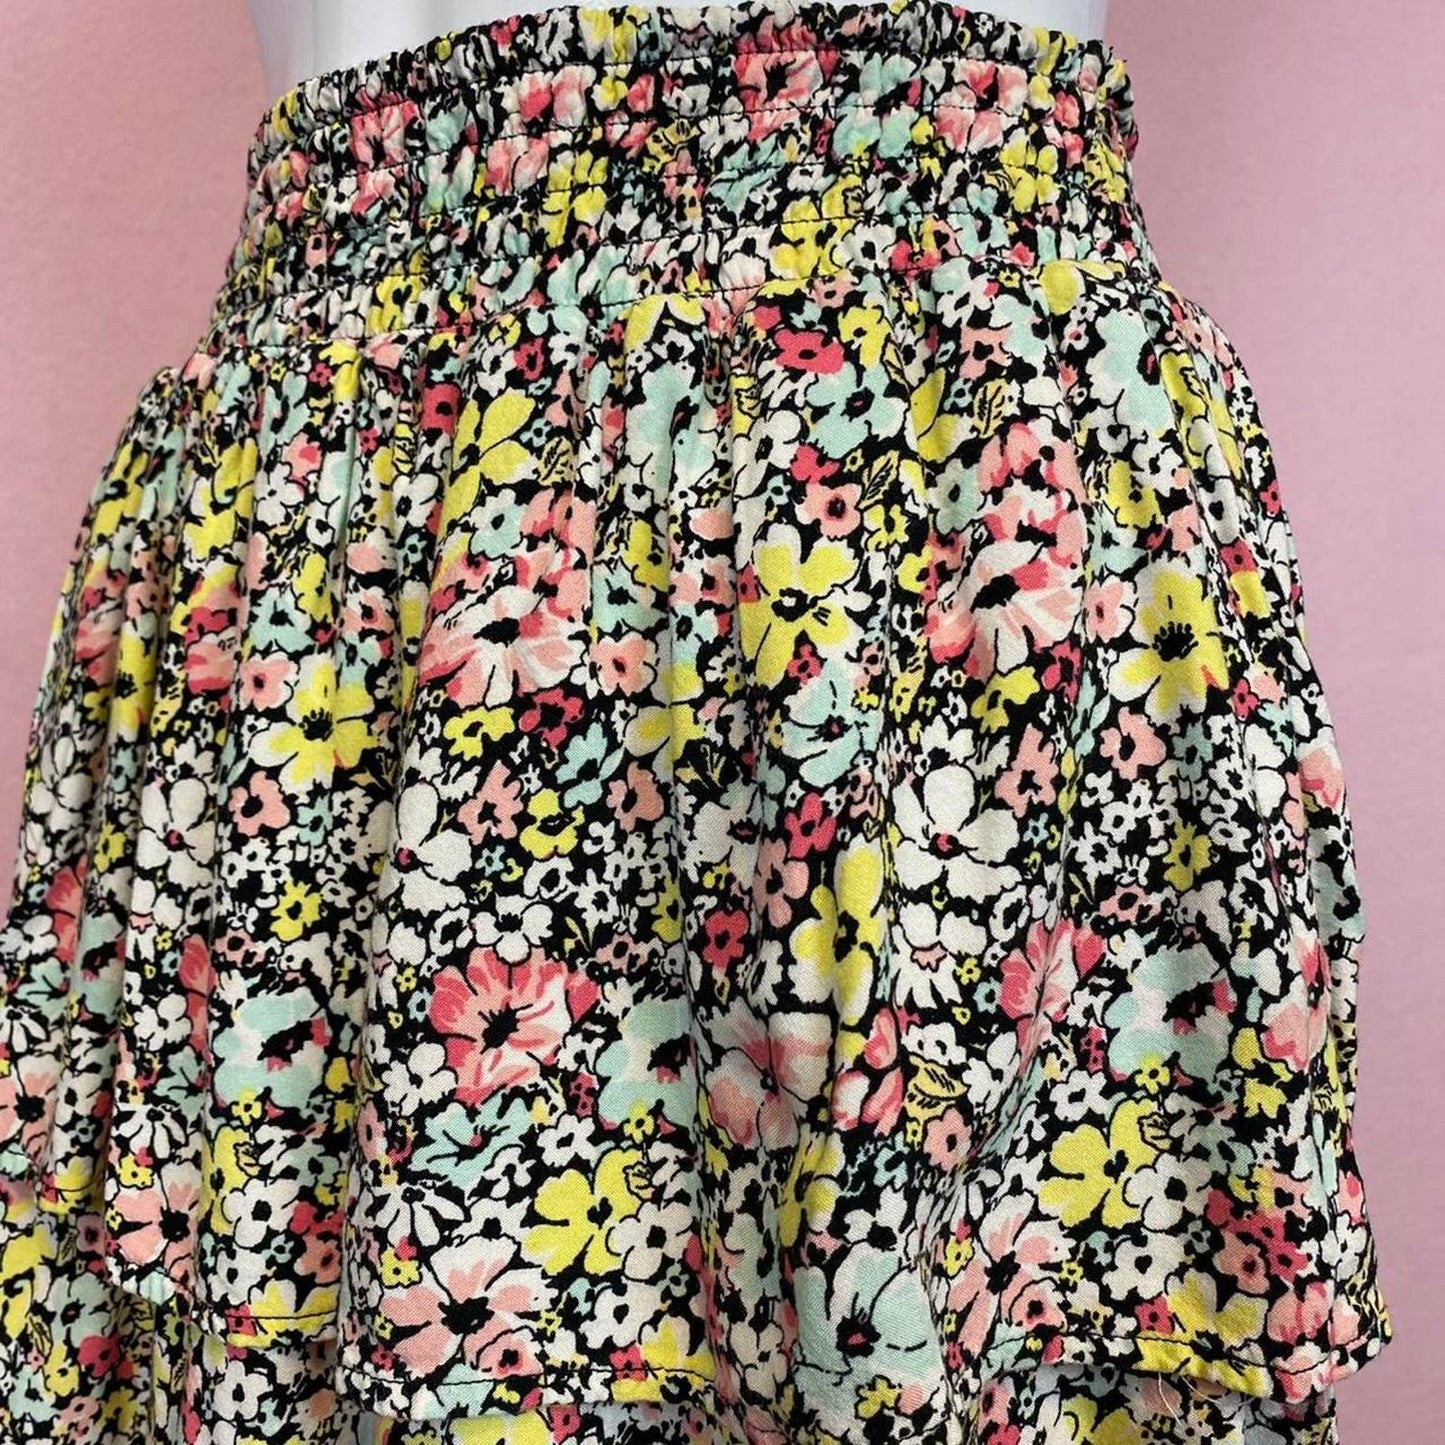 Secondhand No Boundaries Floral Ruffle Mini Skirt, Size Small